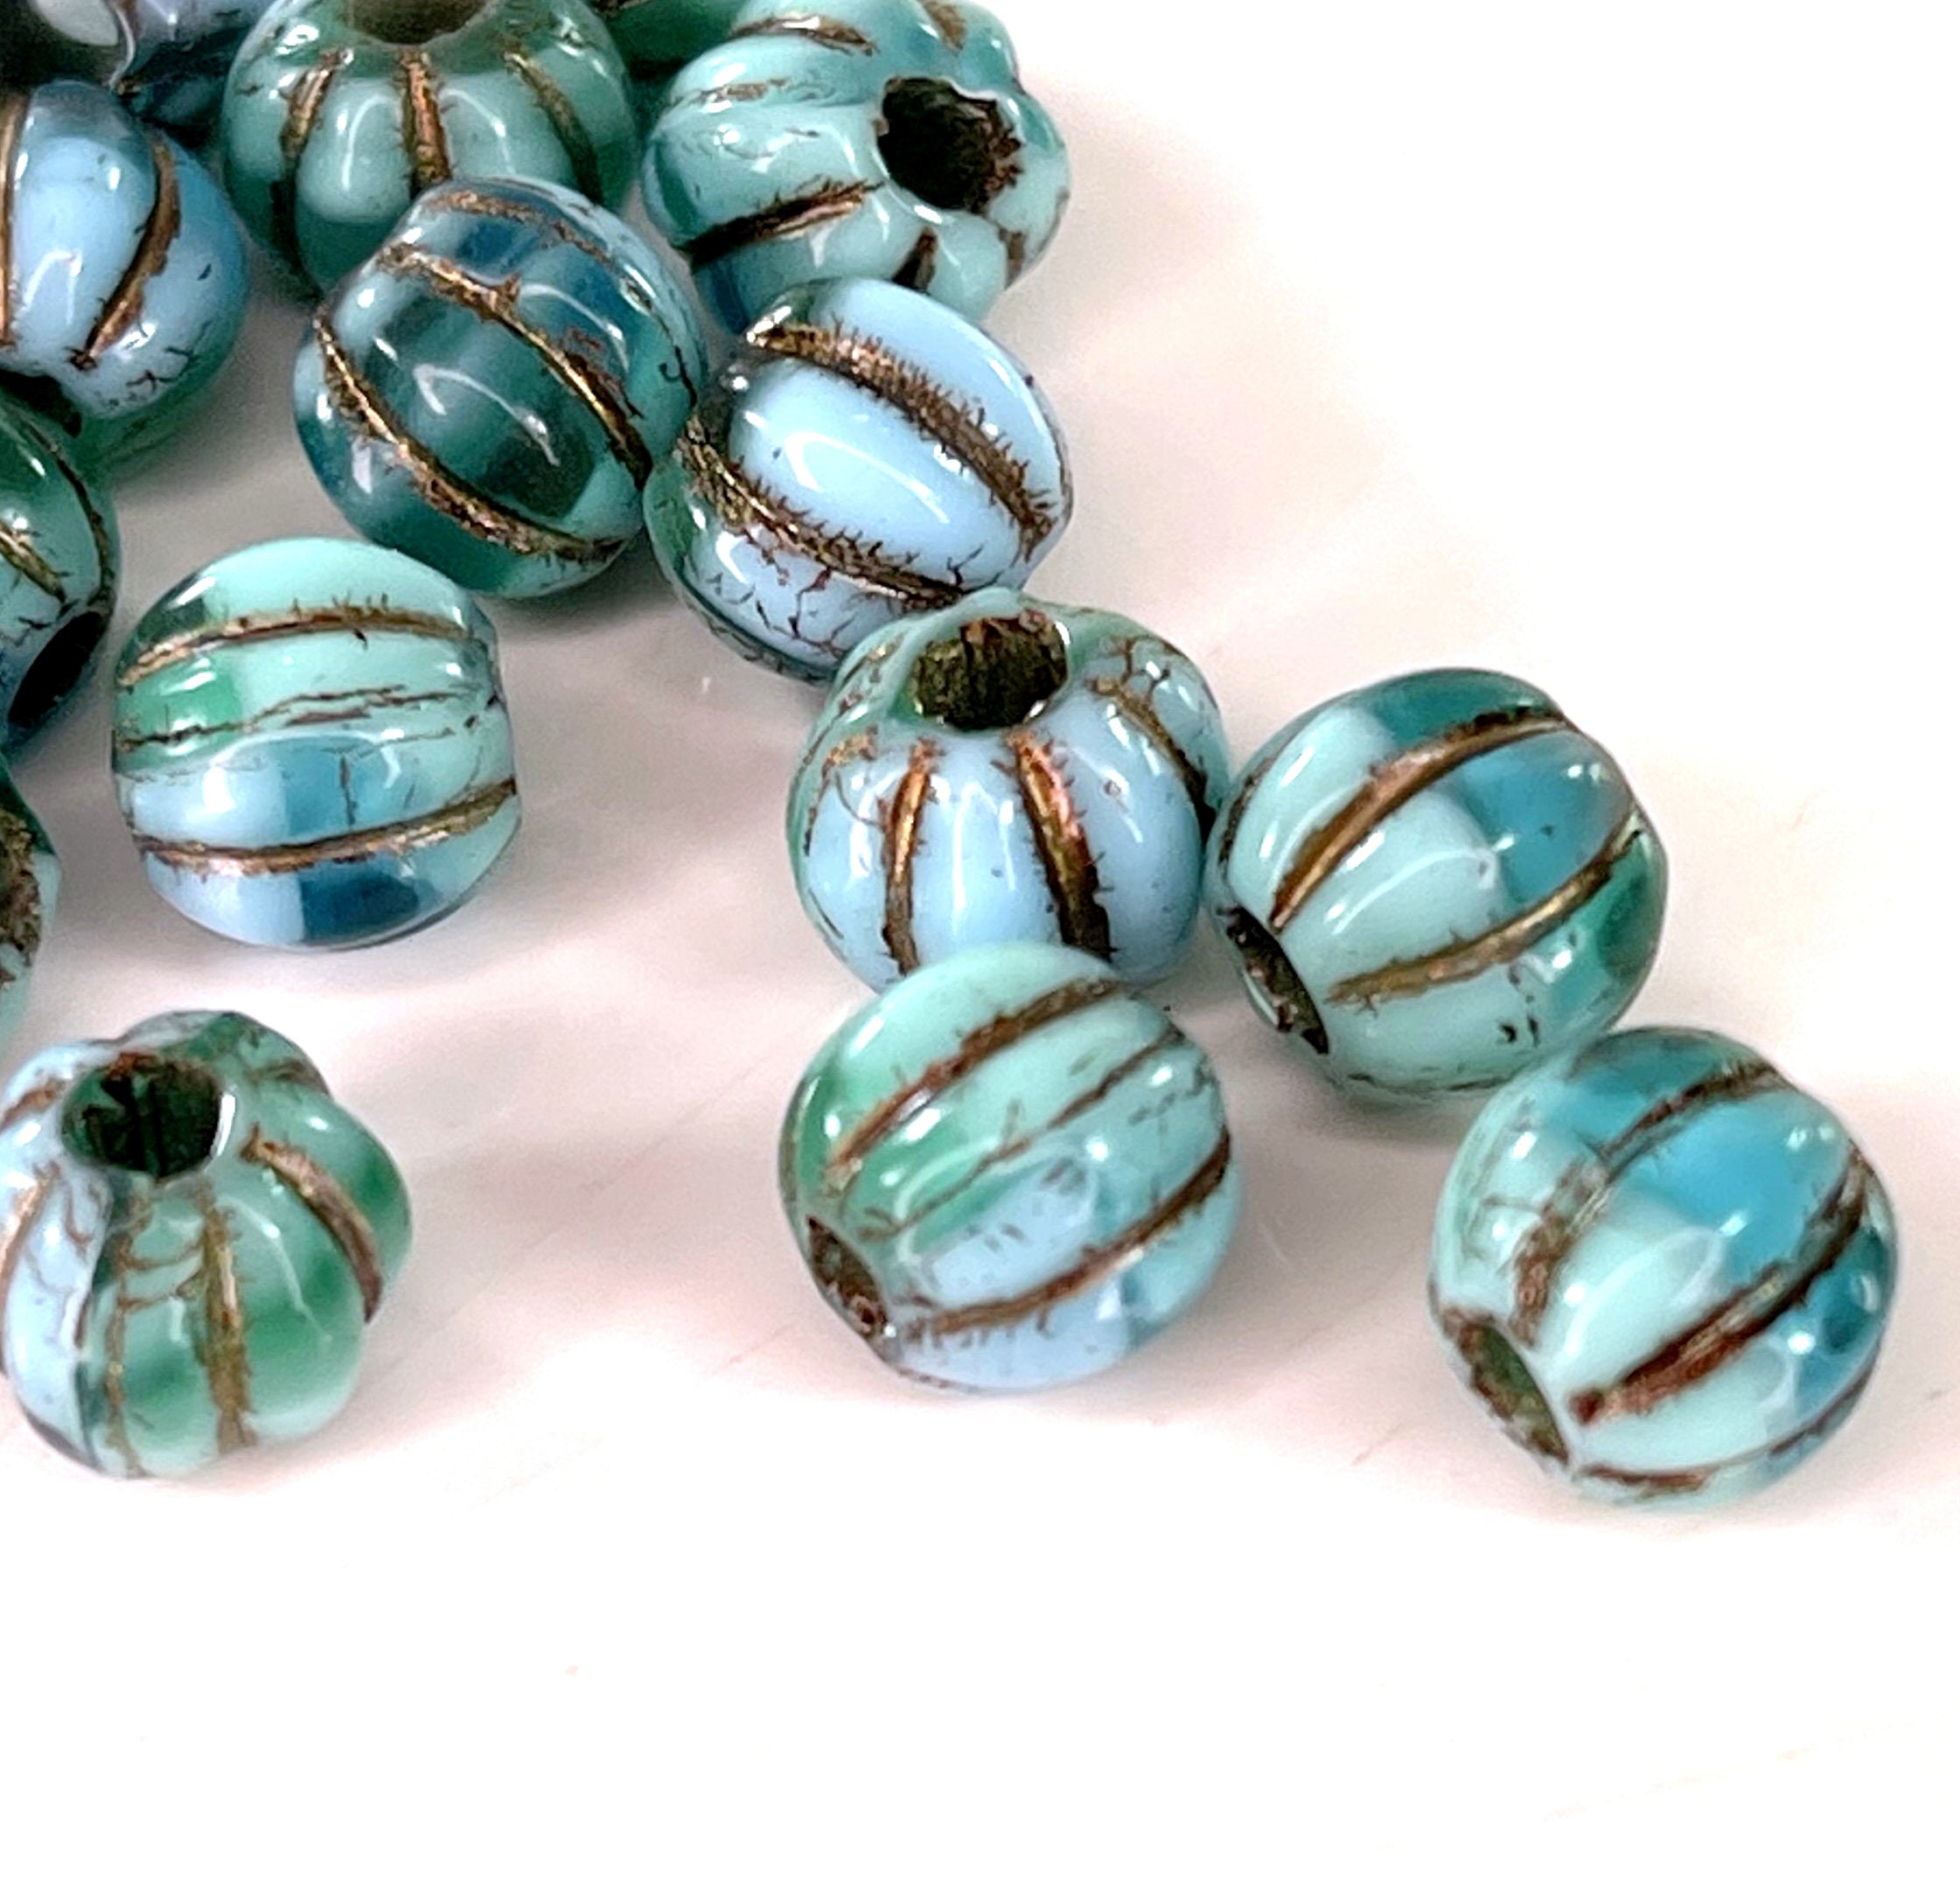 Large Hole Glass Beads, 6mm X 9mm Rondelle Roller With 3mm Hole, Green &  Sky Blue W/gold Wash, 10 Pieces 